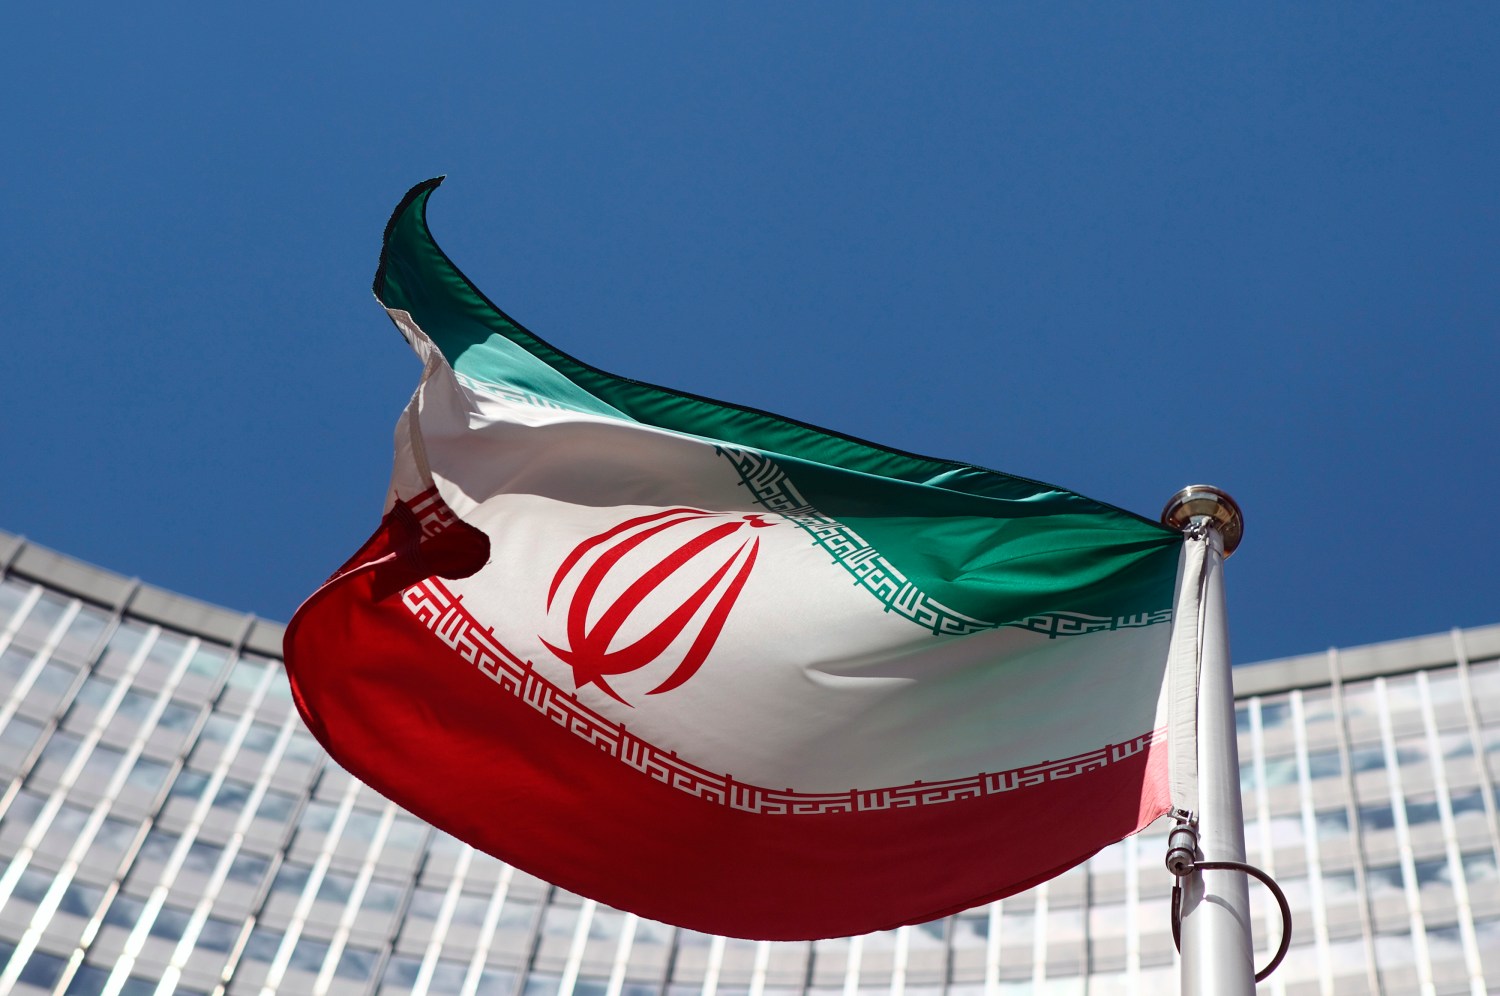 An Iranian flag flutters in front of the United Nations headquarters in Vienna June 17, 2014. Six world powers and Iran began their fifth round of nuclear negotiations on Tuesday in hopes of salvaging prospects for a deal over Tehran's disputed atomic activity by a July deadline. REUTERS/Heinz-Peter Bader (AUSTRIA - Tags: POLITICS ENERGY)